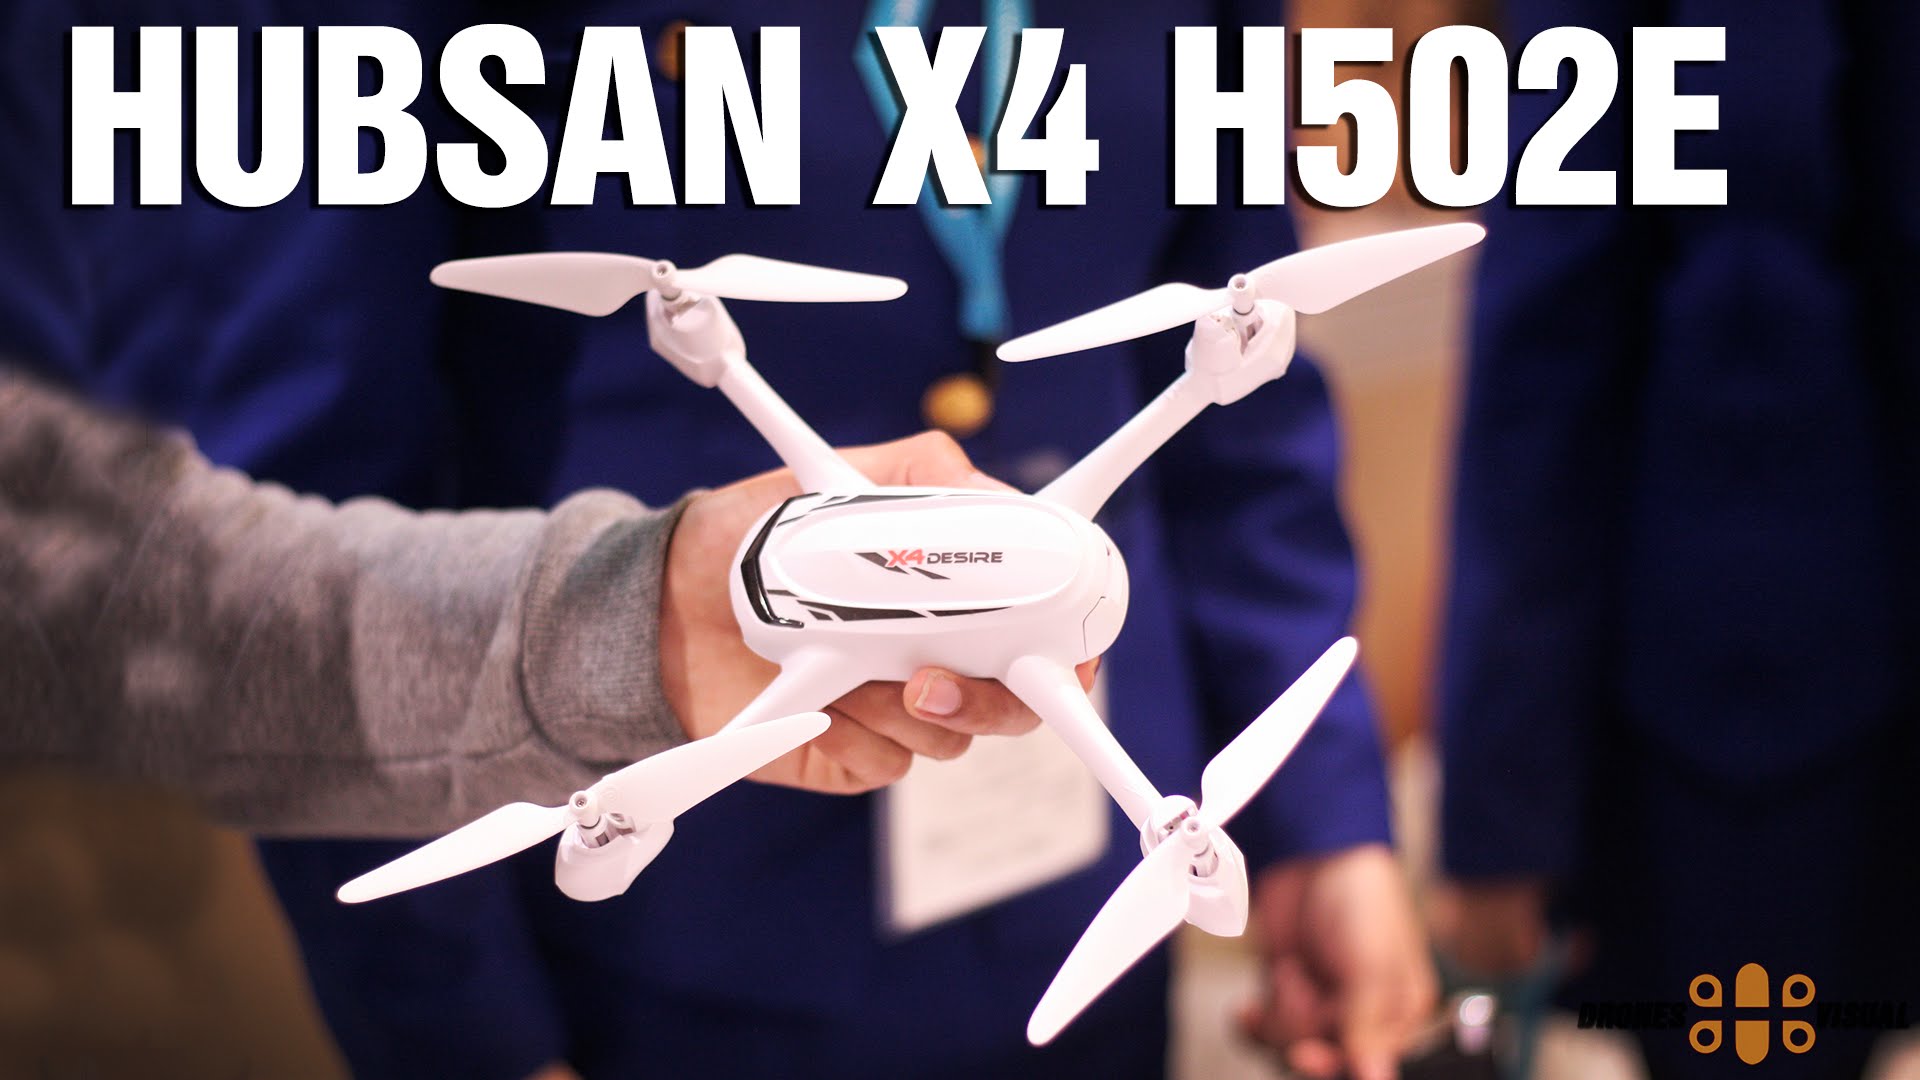 Hubsan X4 H502E Brushed Quadcopter With GPS and Camera